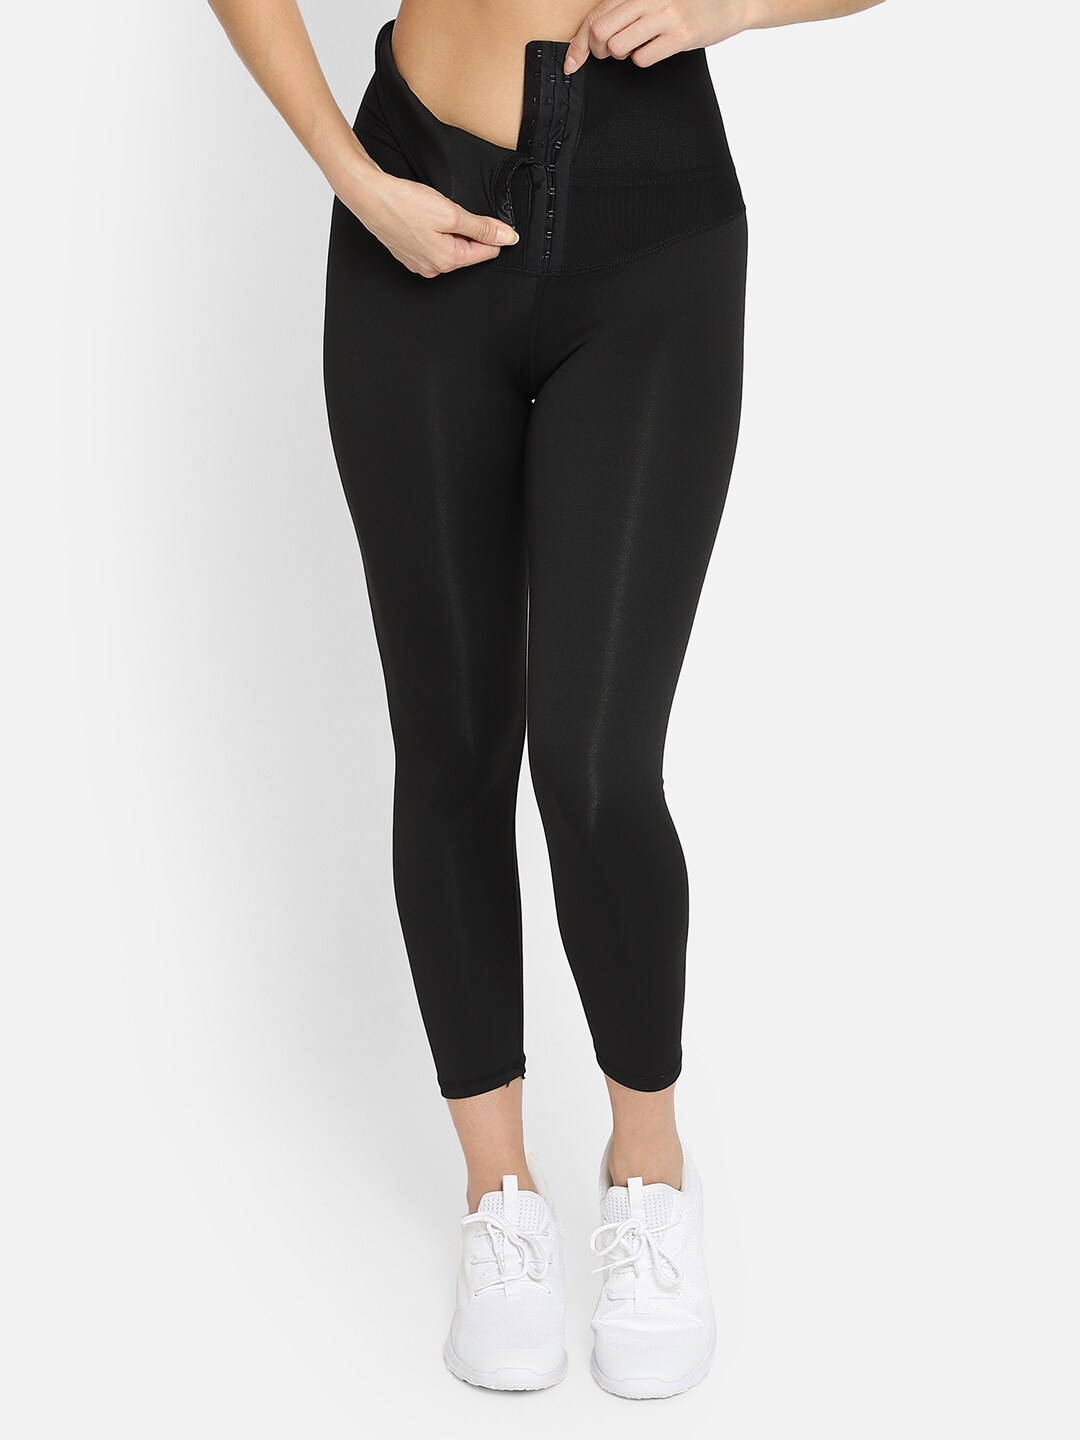 Bellofox Women Black Solid Slink-Fit Rapid-Dry Yoga Tights Price in India